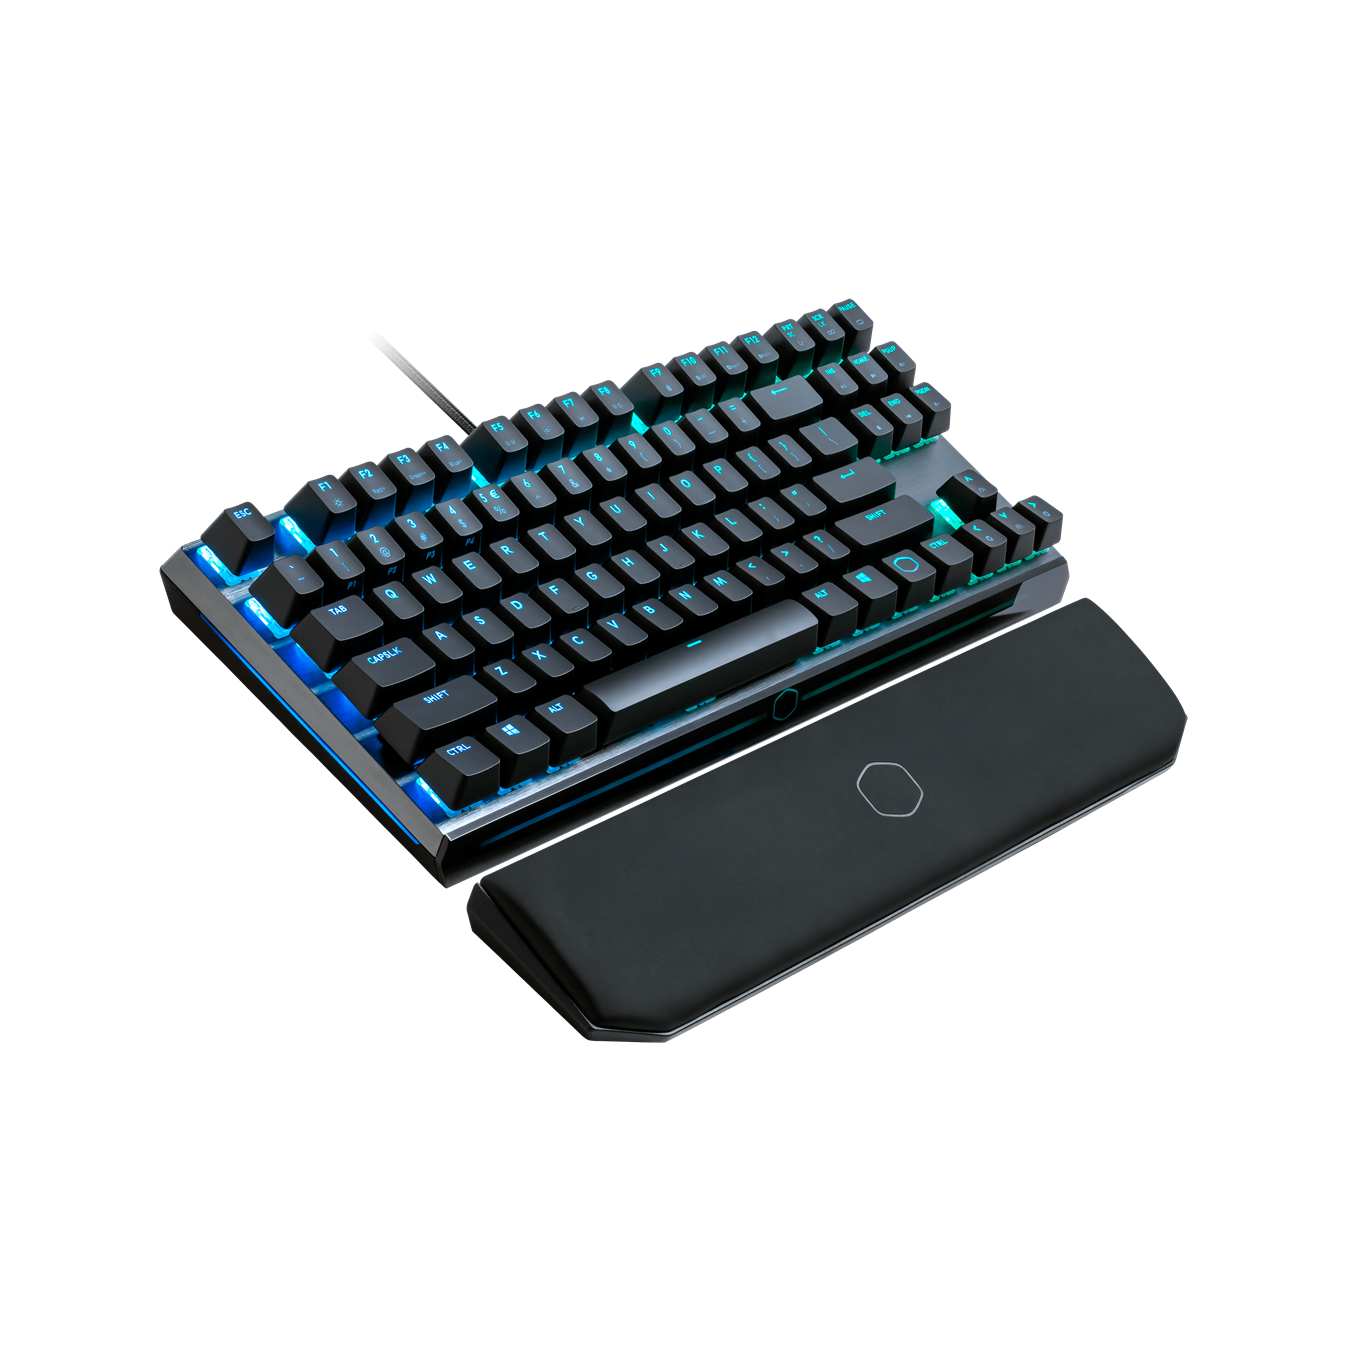 The MK730 is a pro-grade Tenkeyless gaming keyboard to save desk space or for the gamer on the go.